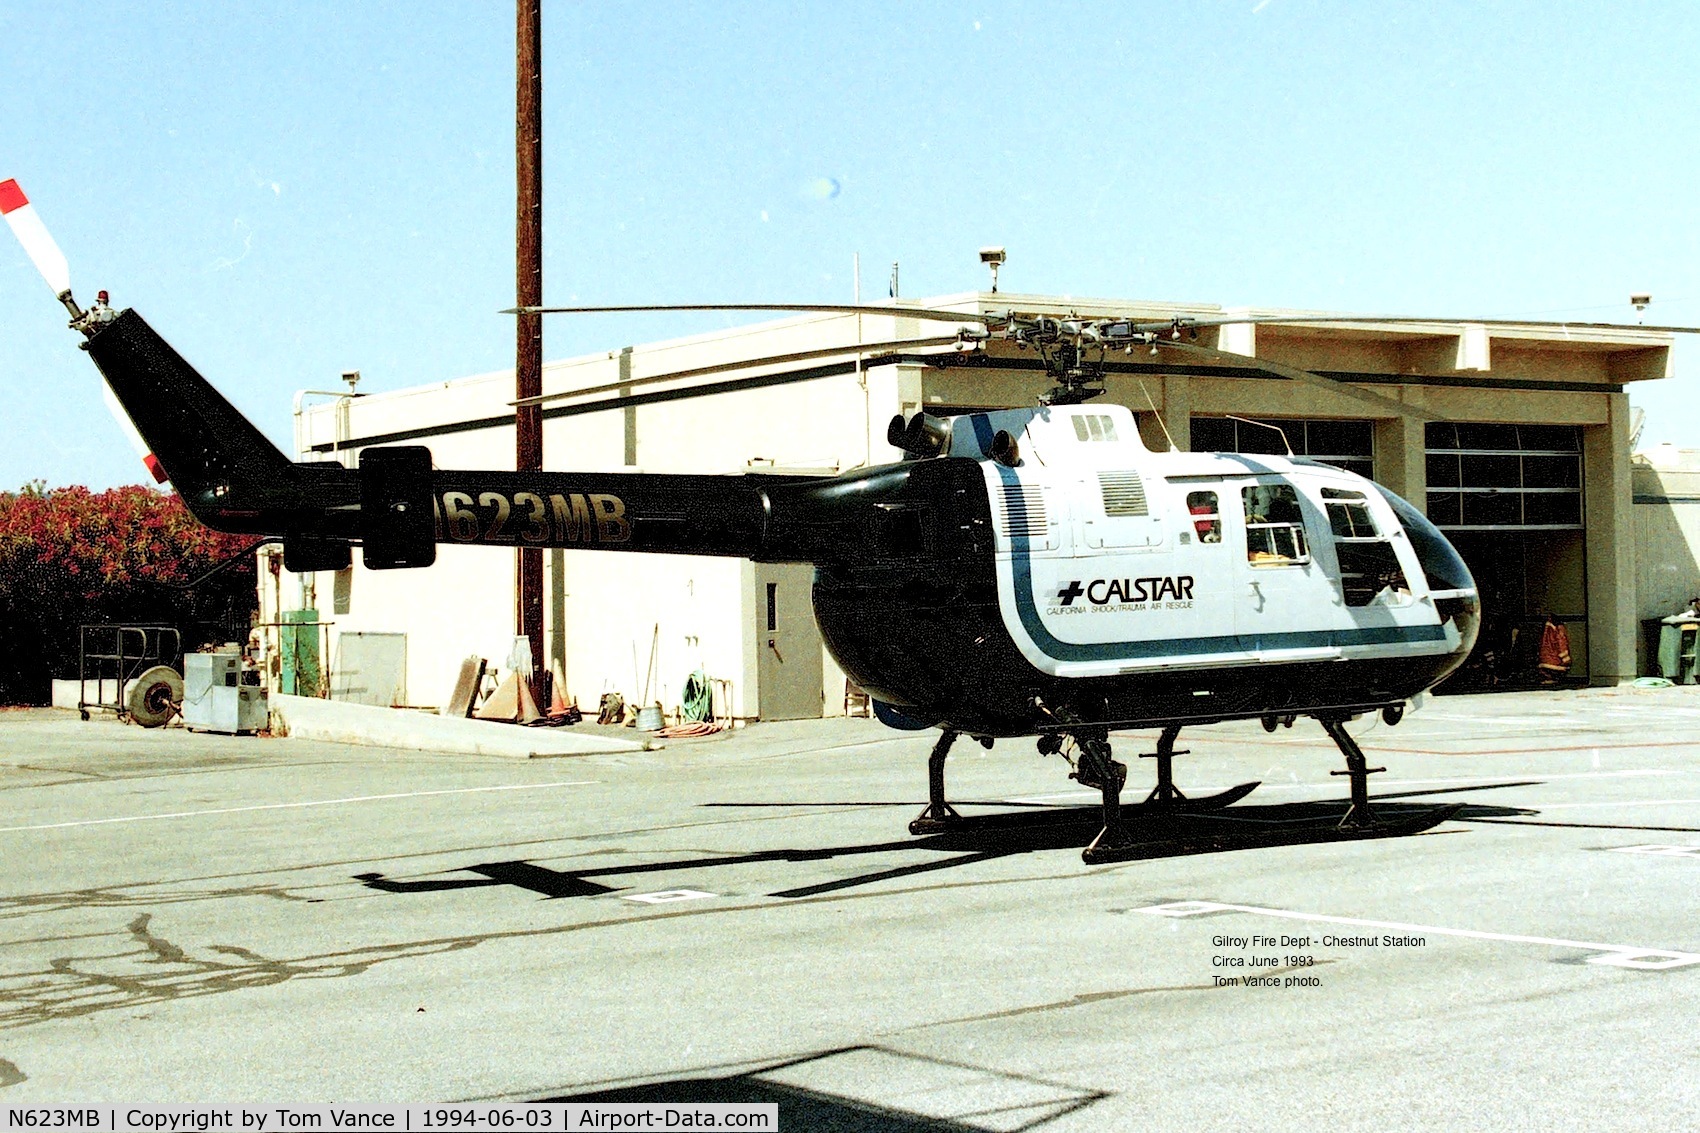 N623MB, 1986 MBB Bo-105CBS-5 C/N S-750, at Gilroy Fire Dept - Chestnut Station apprx June 1994 for training and classes working with local Fire depts. off airport.date apprx.